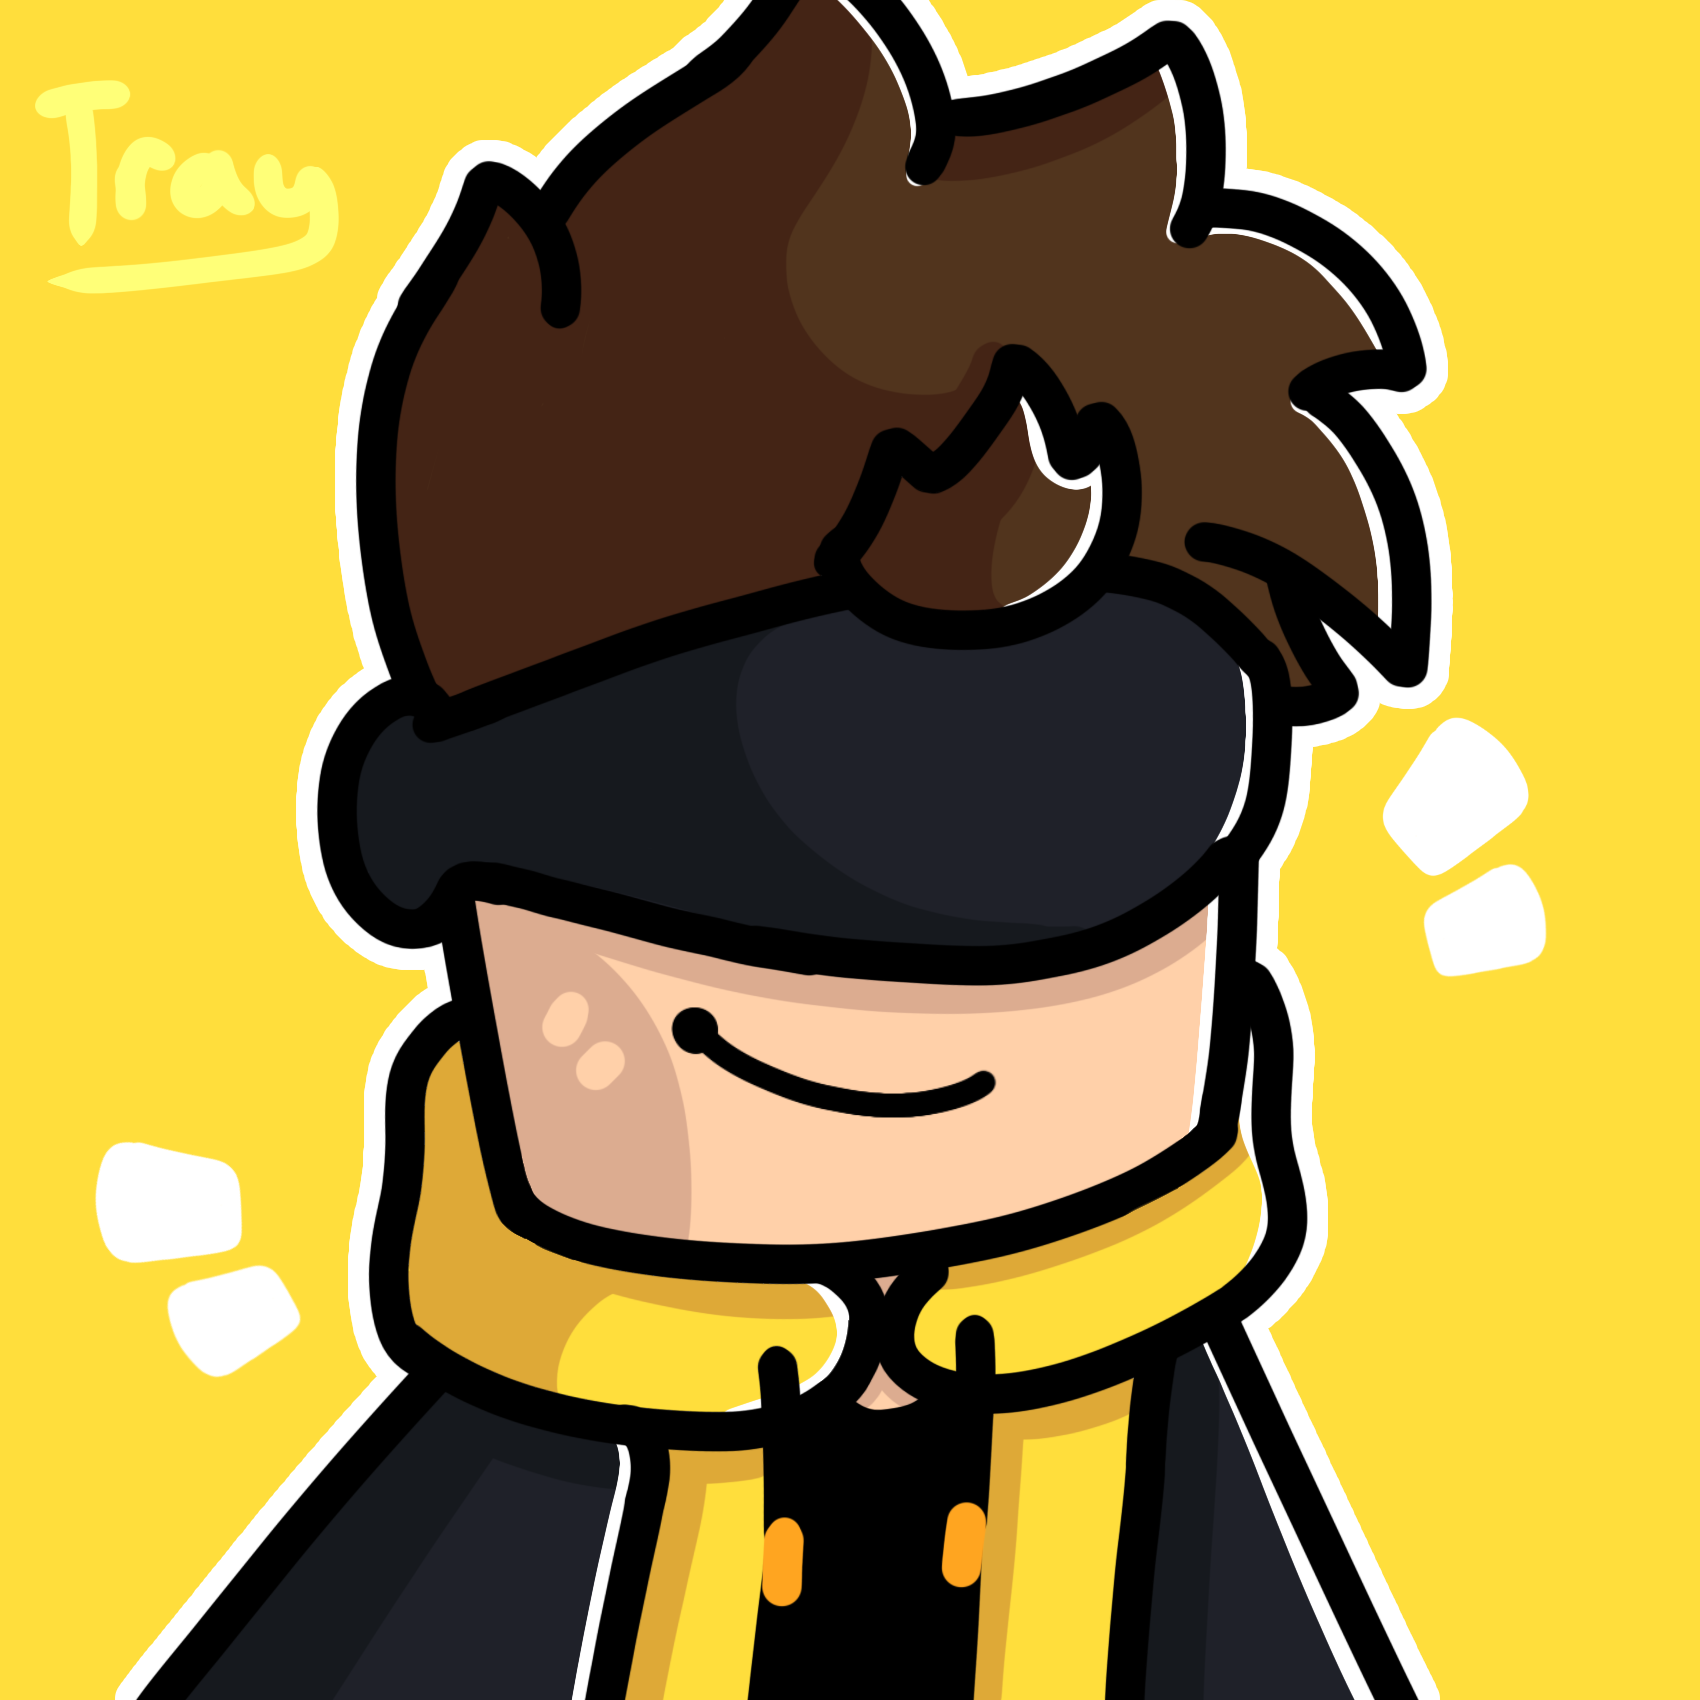 v4sk3's Profile Picture on PvPRP